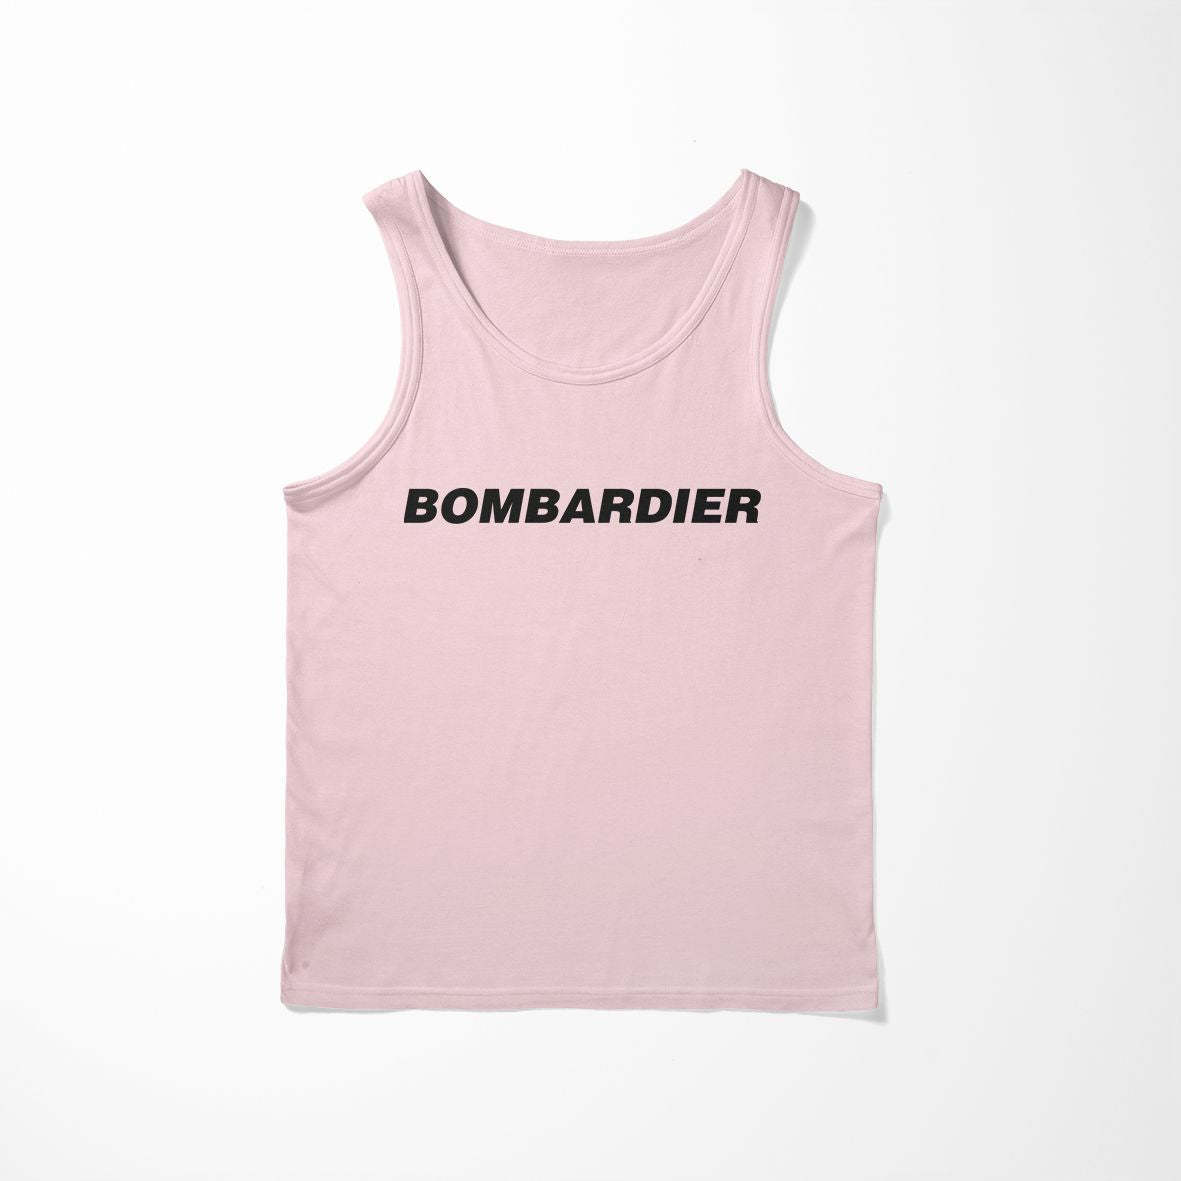 Bombardier & Text Designed Tank Top